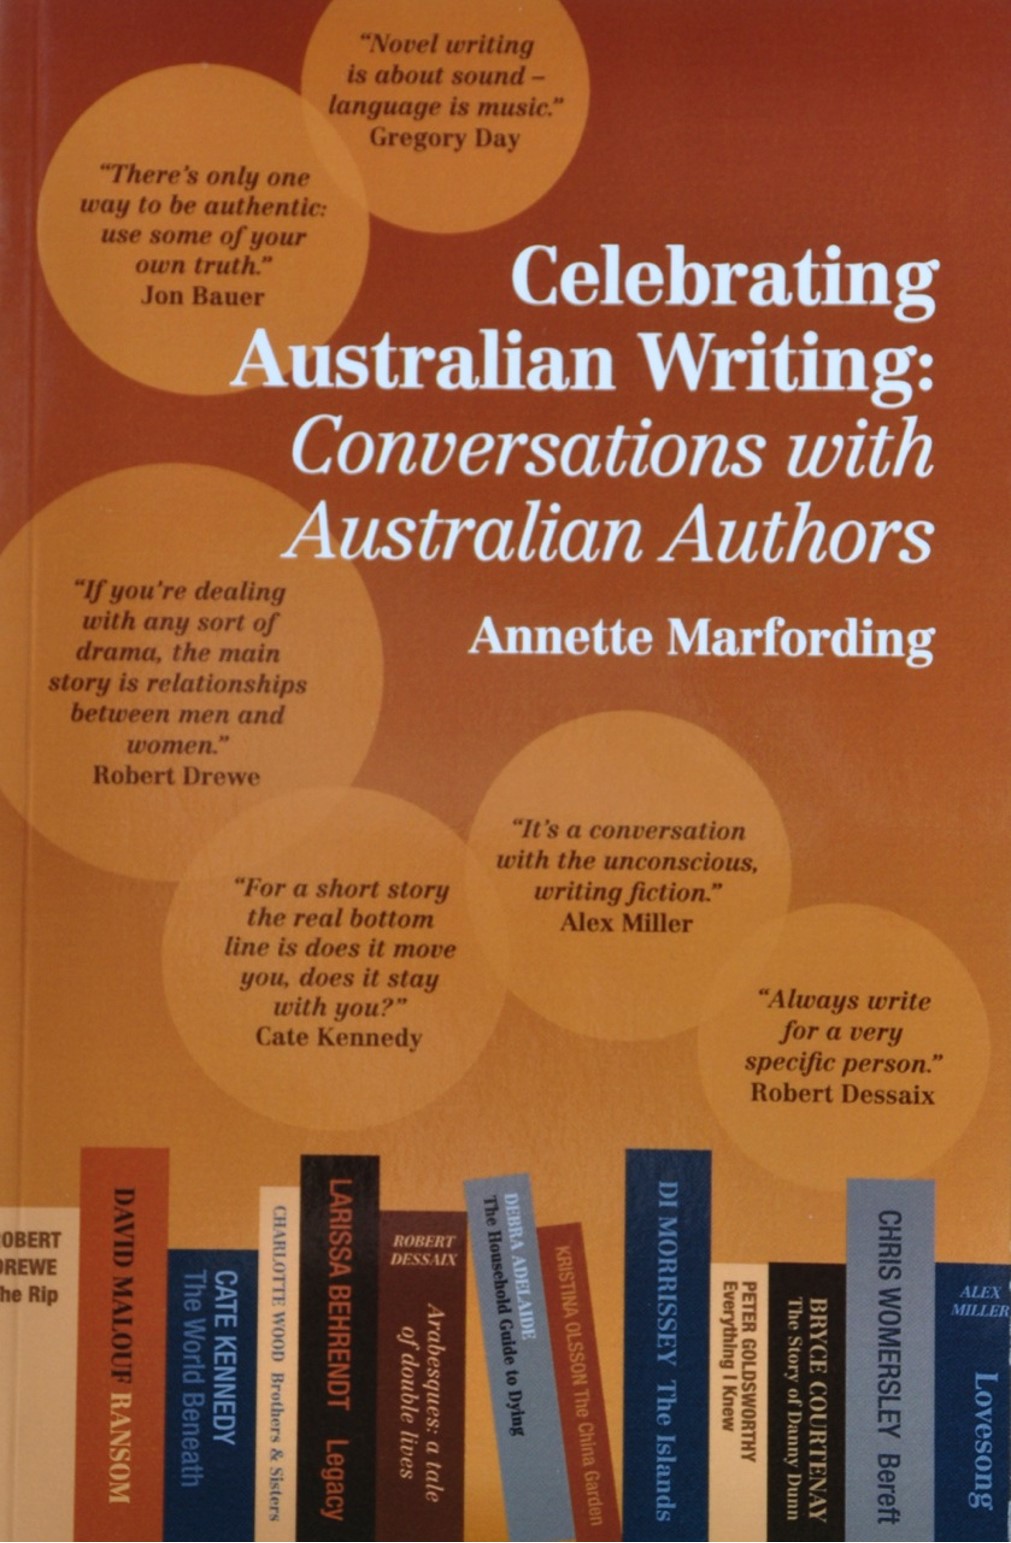 Annette Marfording's book Celebrating Australian Writing: Conversations with Australian Authors